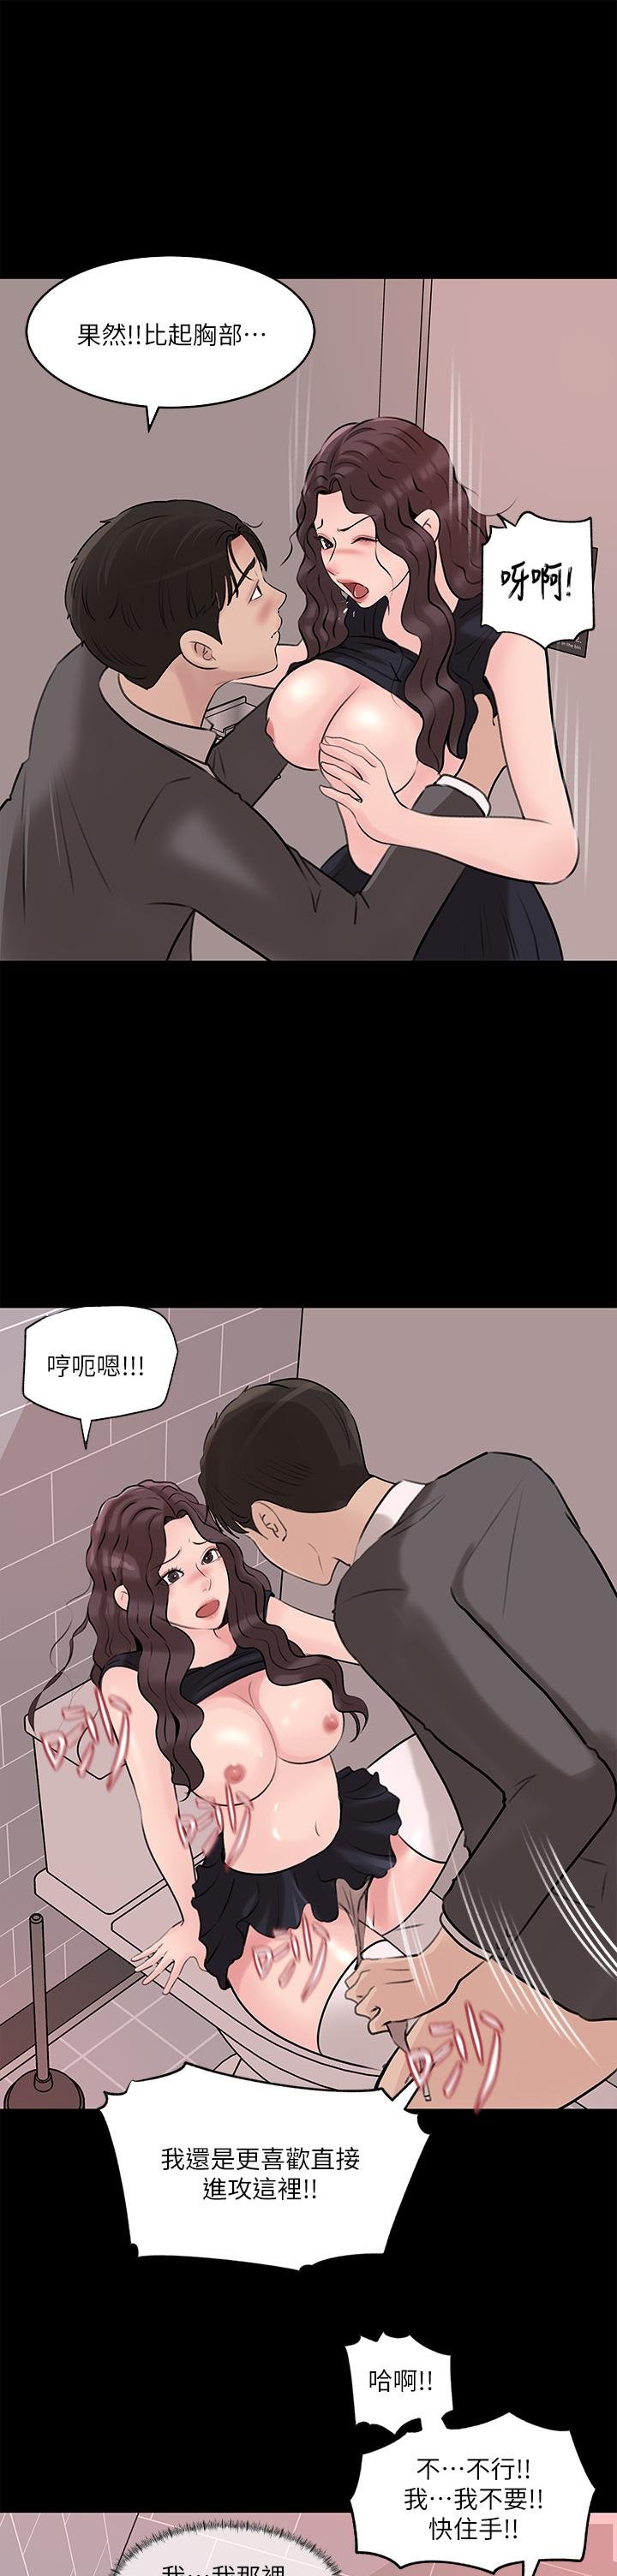 in-my-sister-in-law-raw-chap-30-30